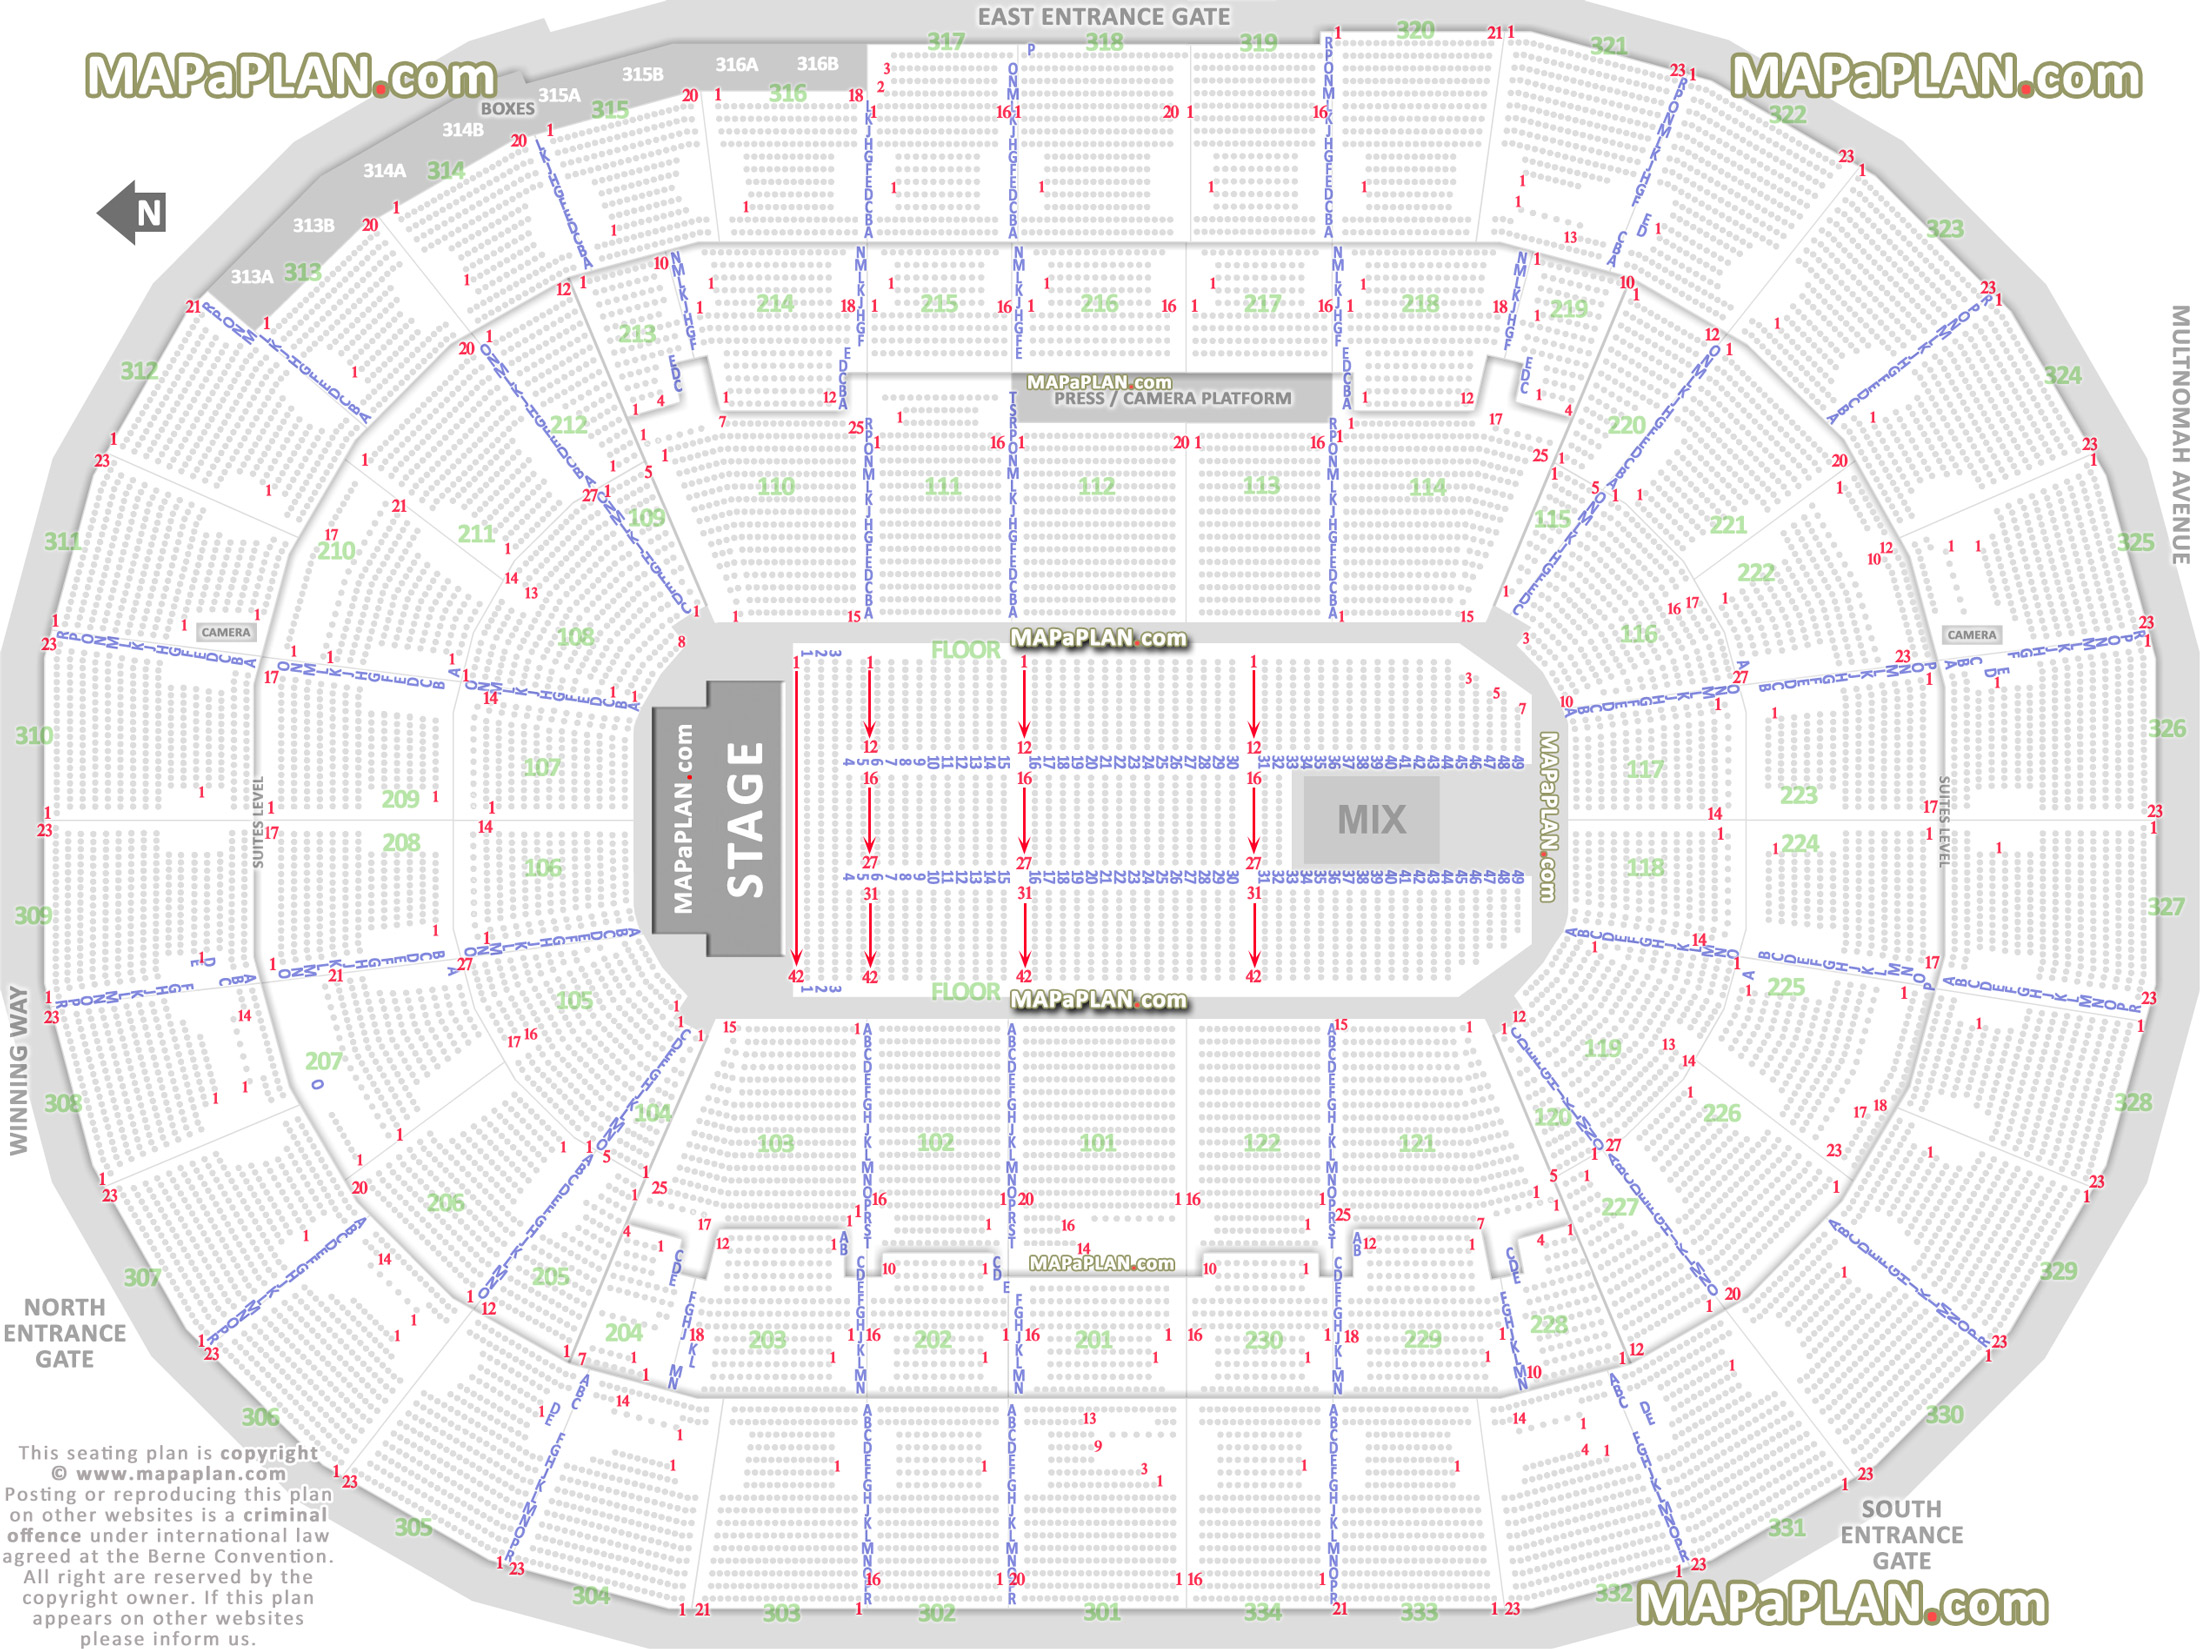 detailed seat row numbers end stage concert sections floor plan map arena 100 200 300 club level layout Portland Moda Center seating chart